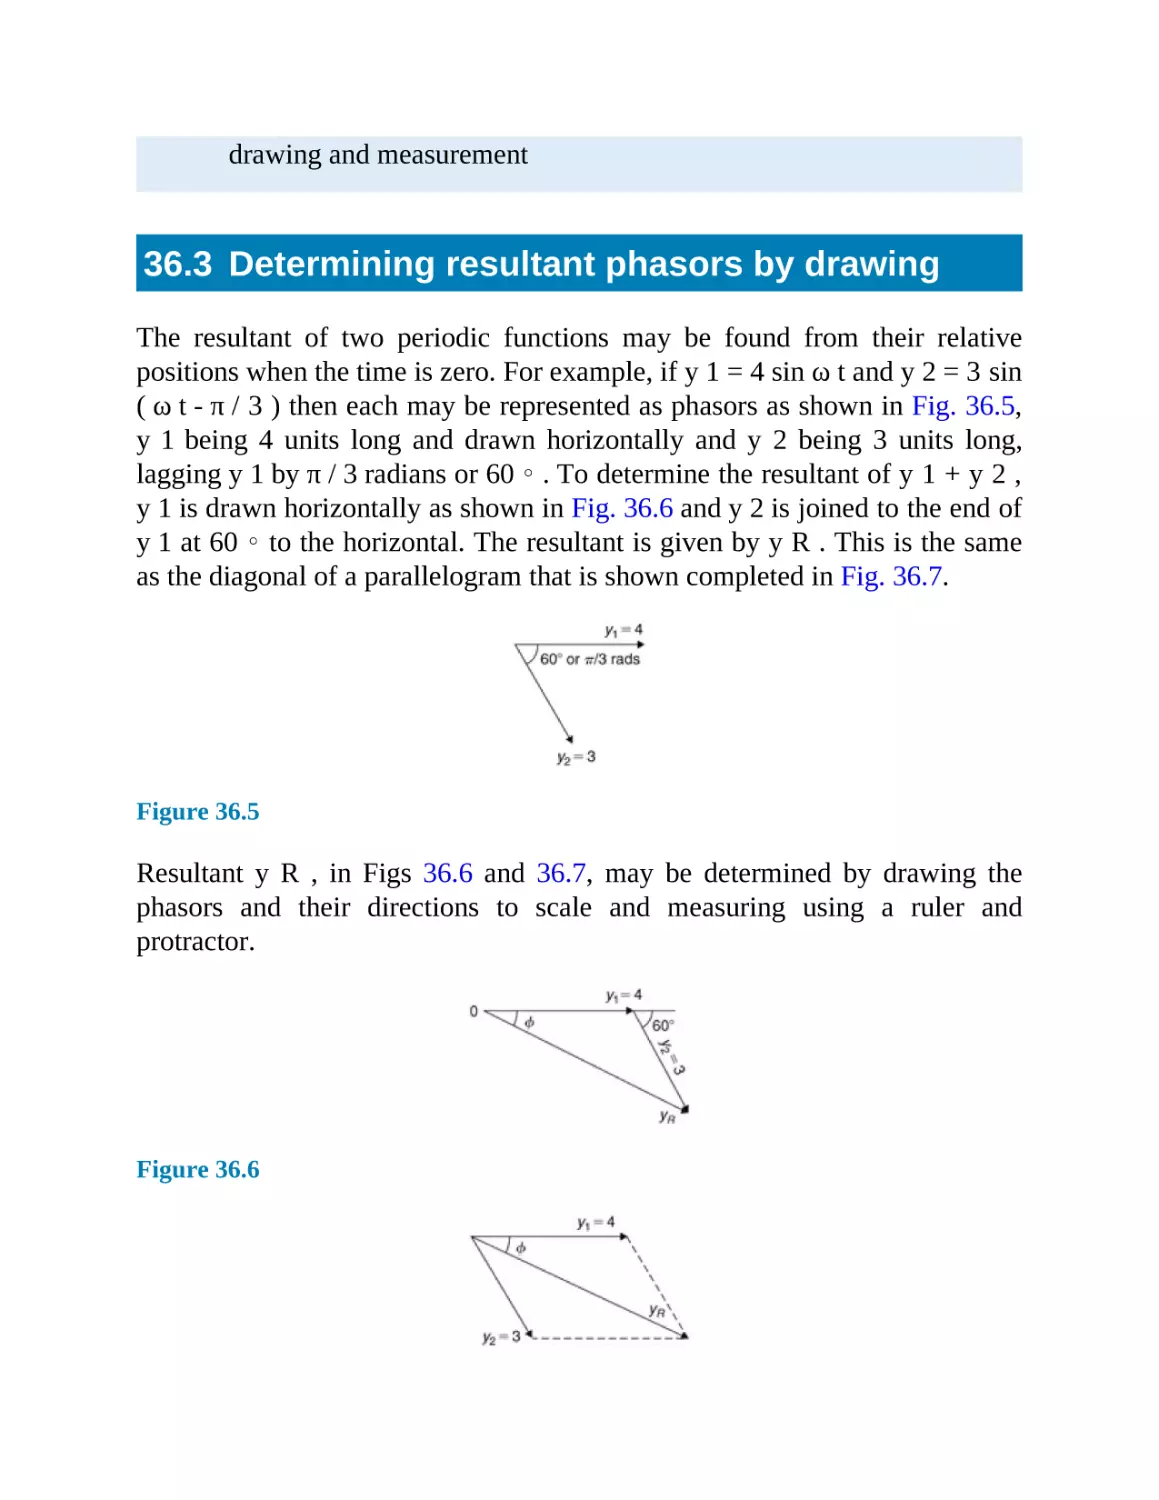 36.3 Determining resultant phasors by drawing